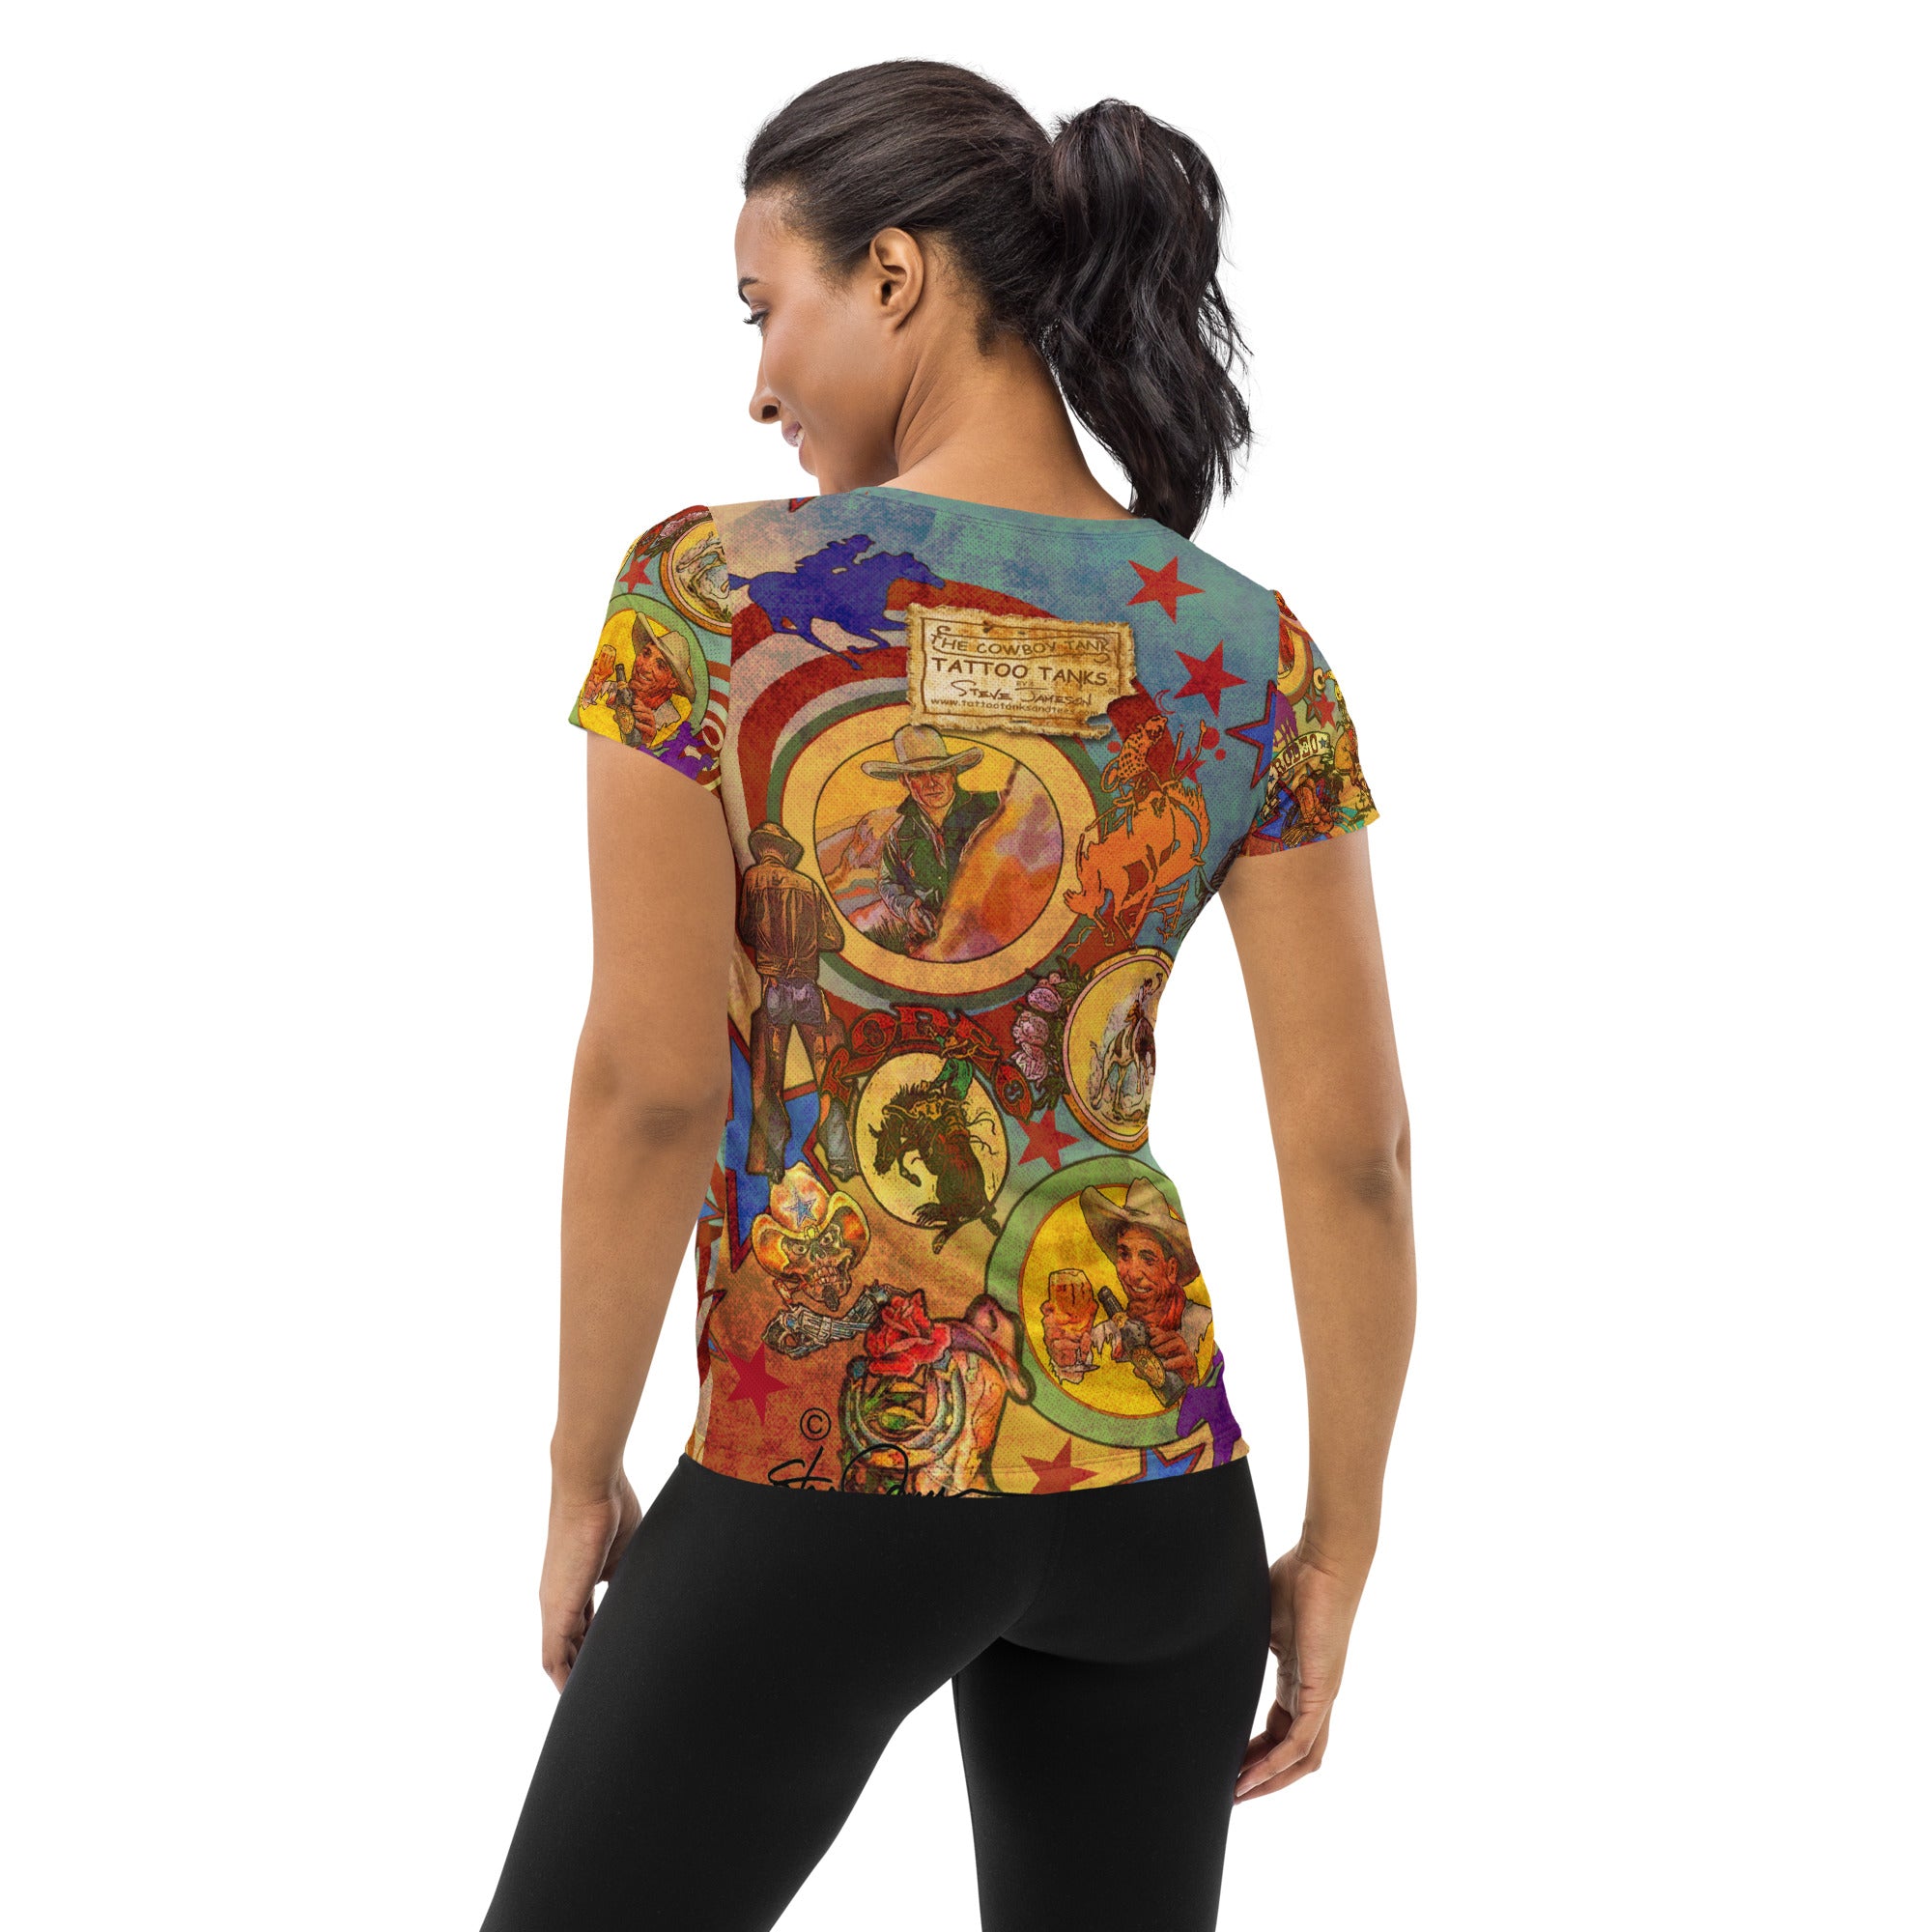 "COWBOY TATTOO" ATHLETIC TEE FOR WOMEN